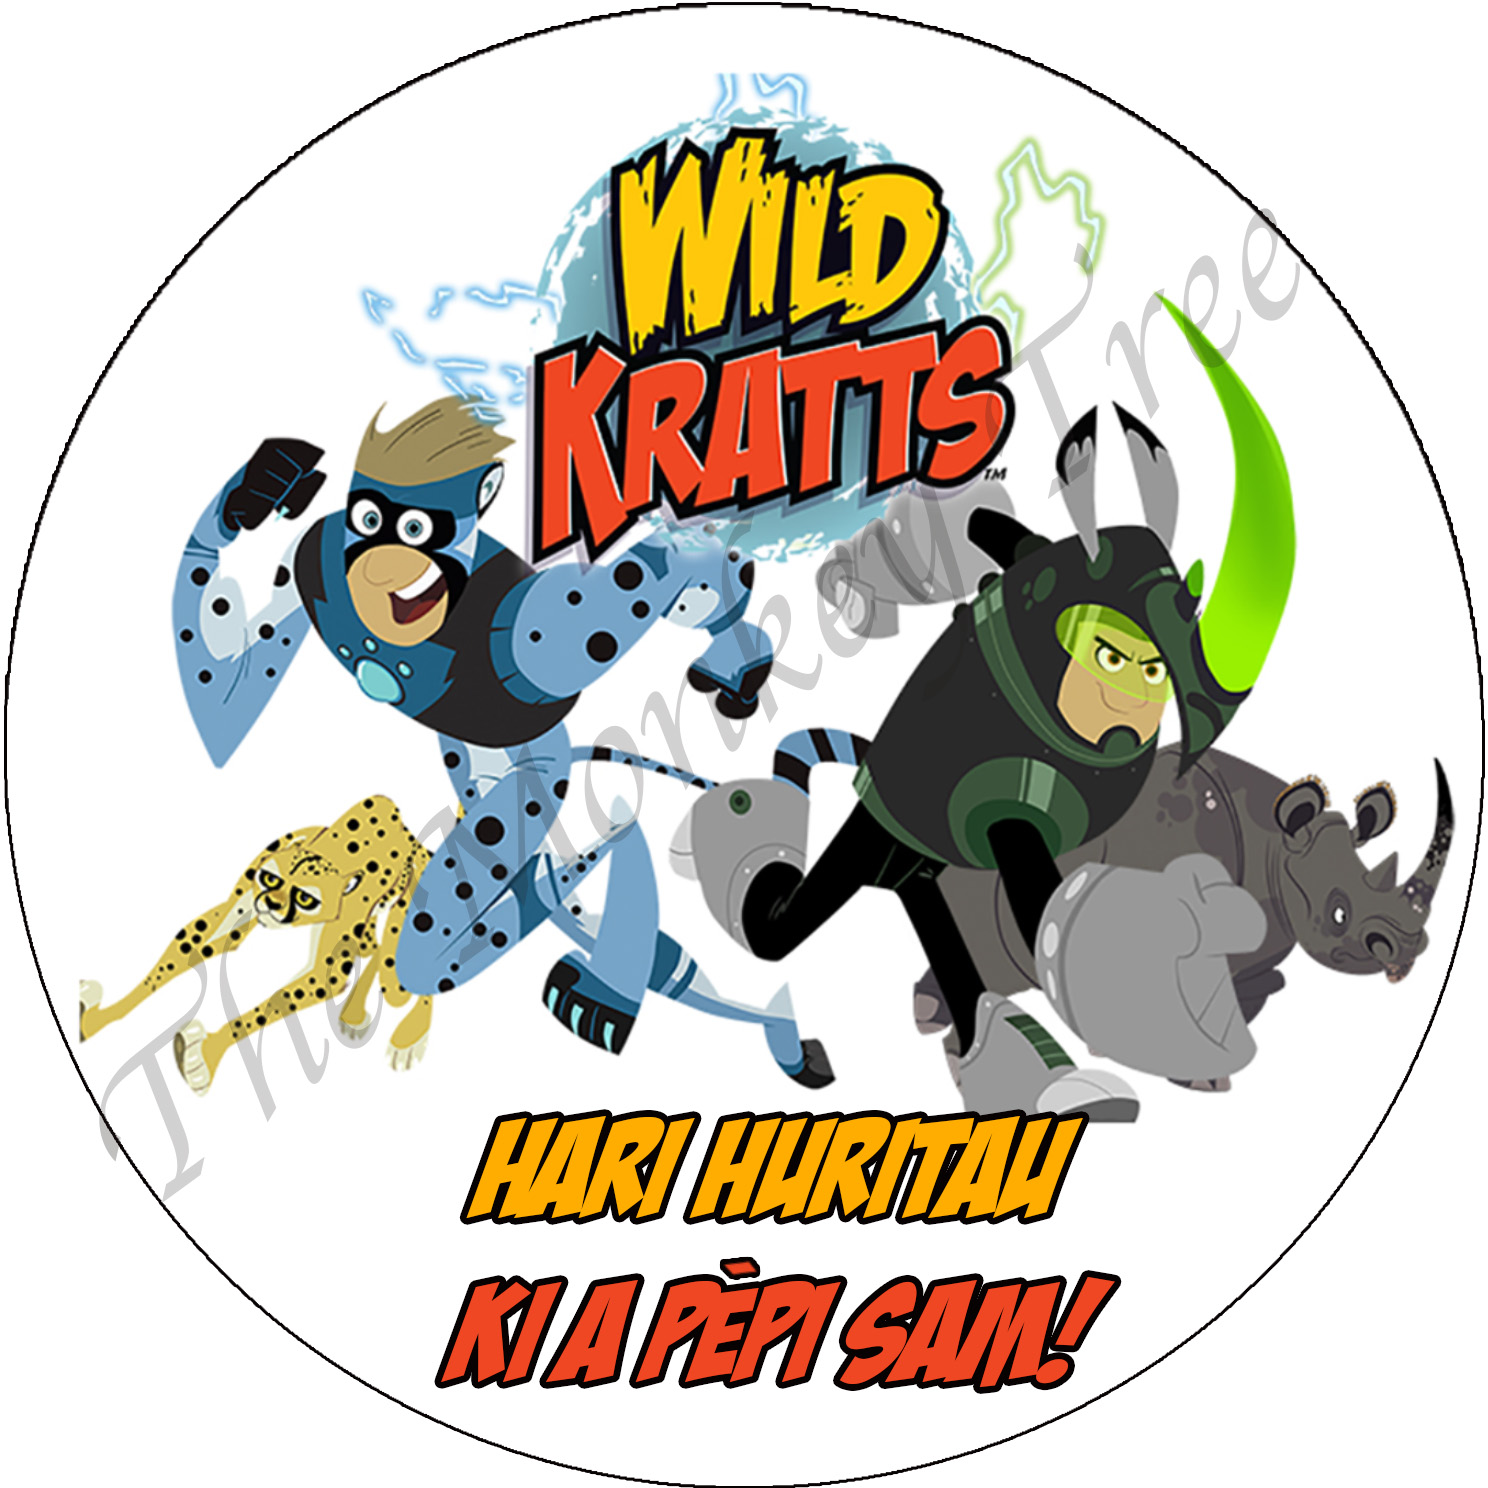 Wild Kratts Birthday Party - Fun Ideas For Food, Decor and Games